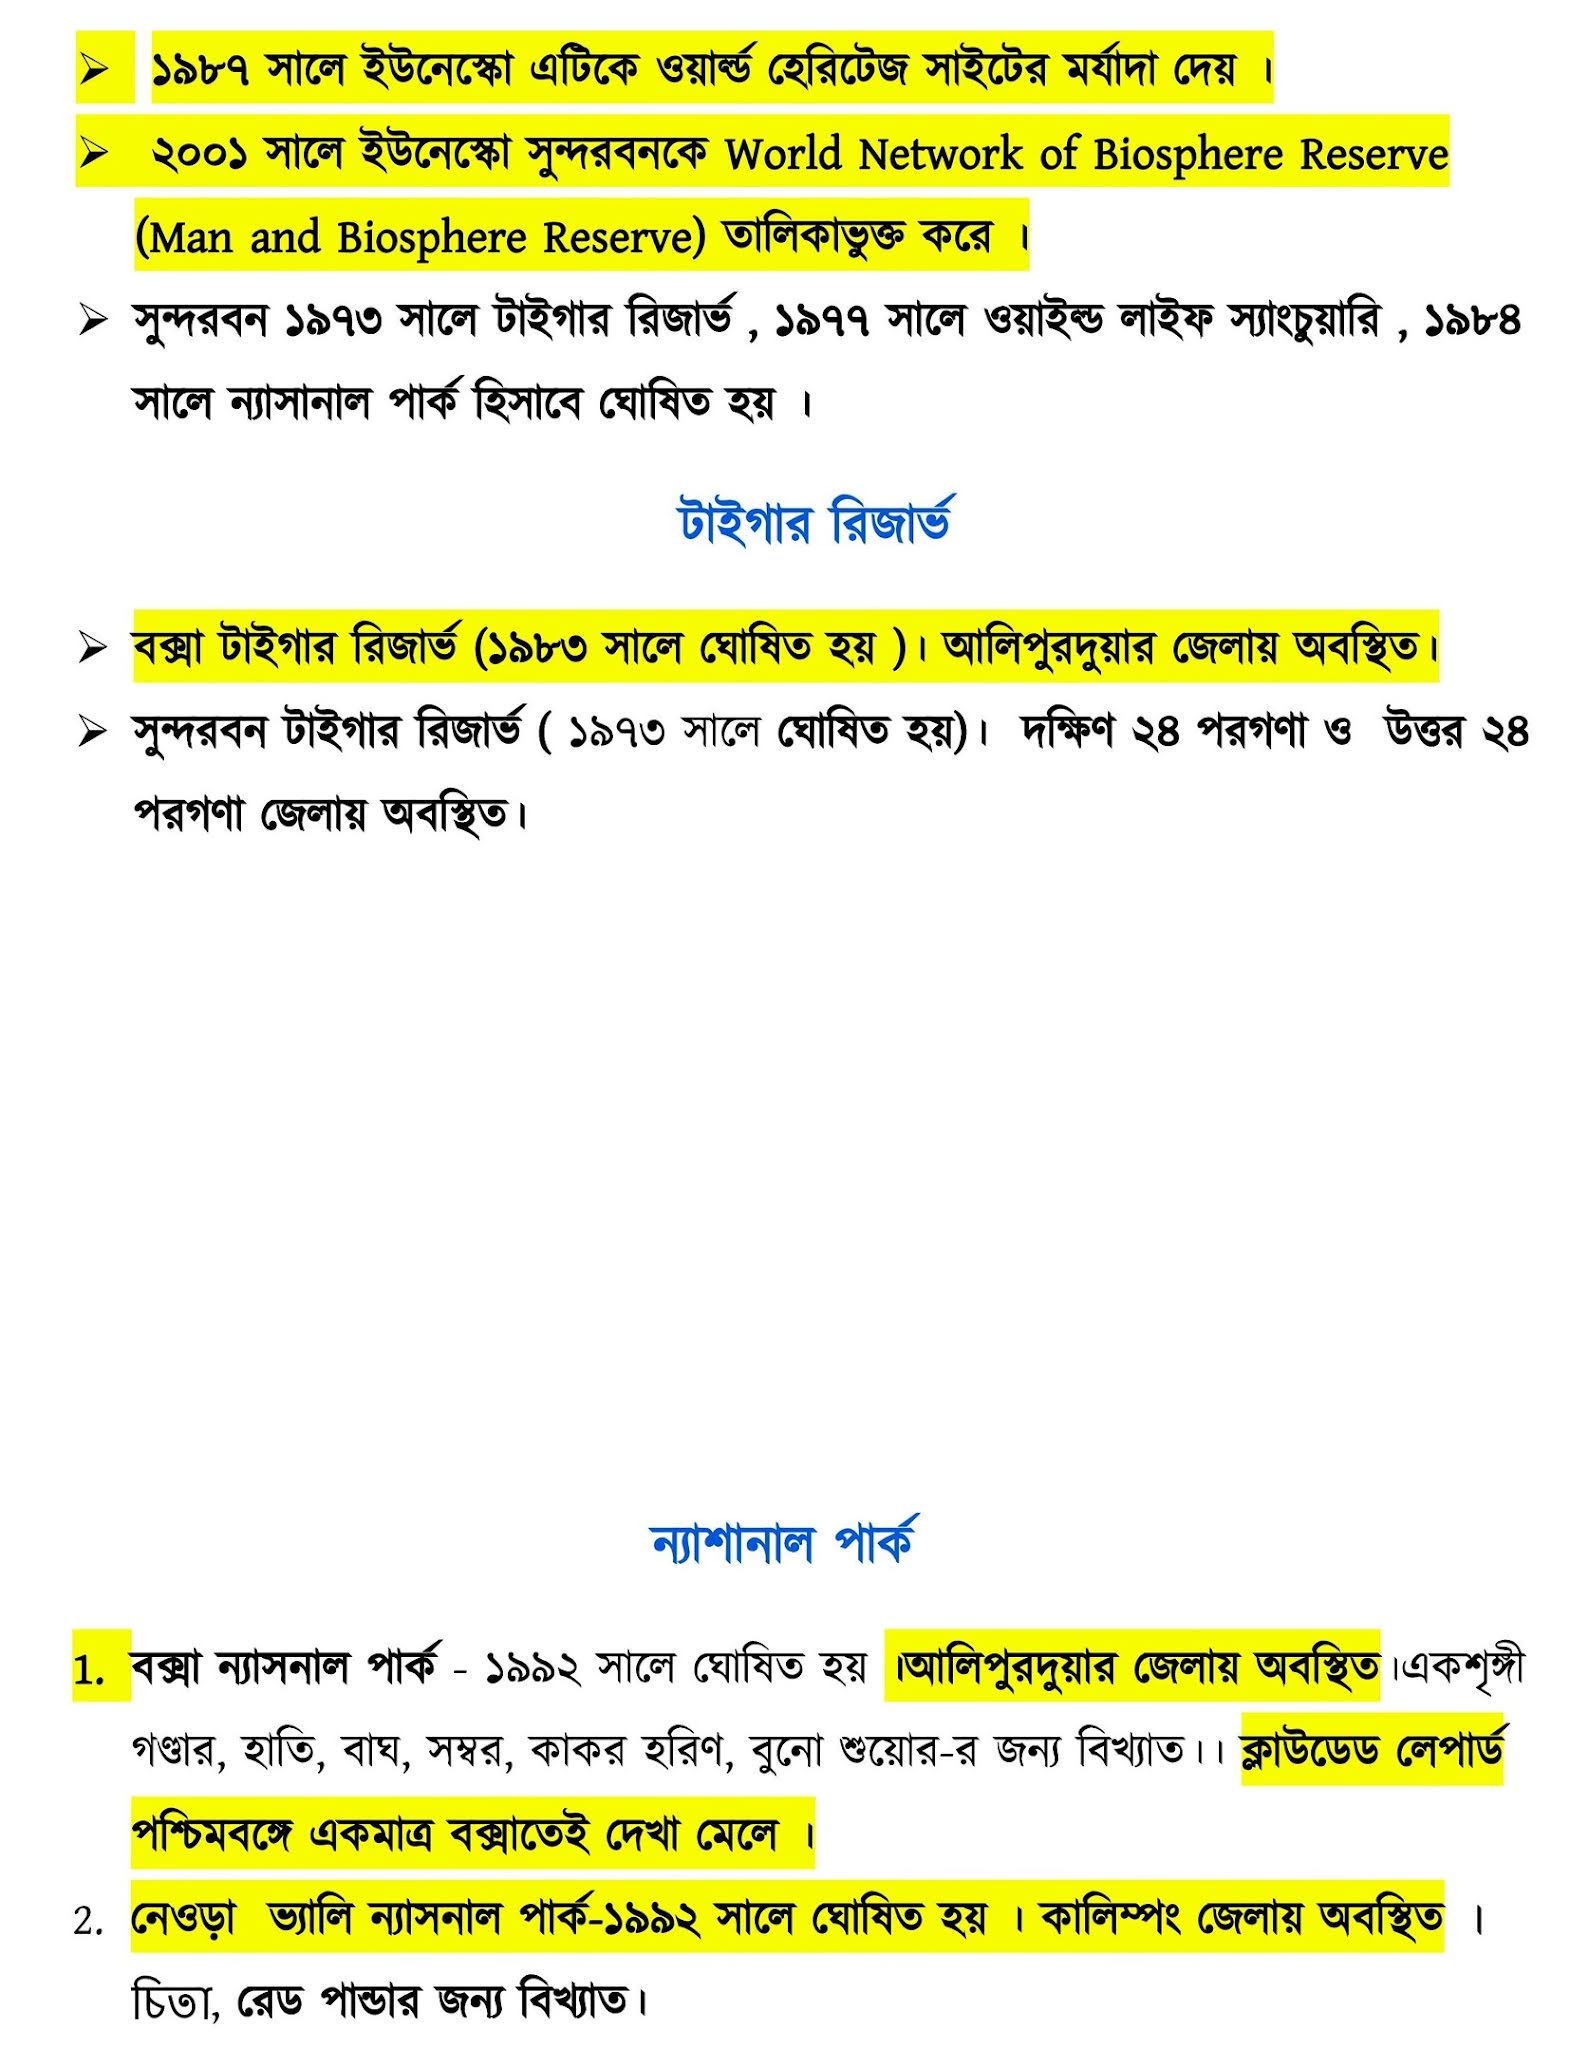 West Bengal Geography Complete Syallabus Study Material - WBCS Notebook